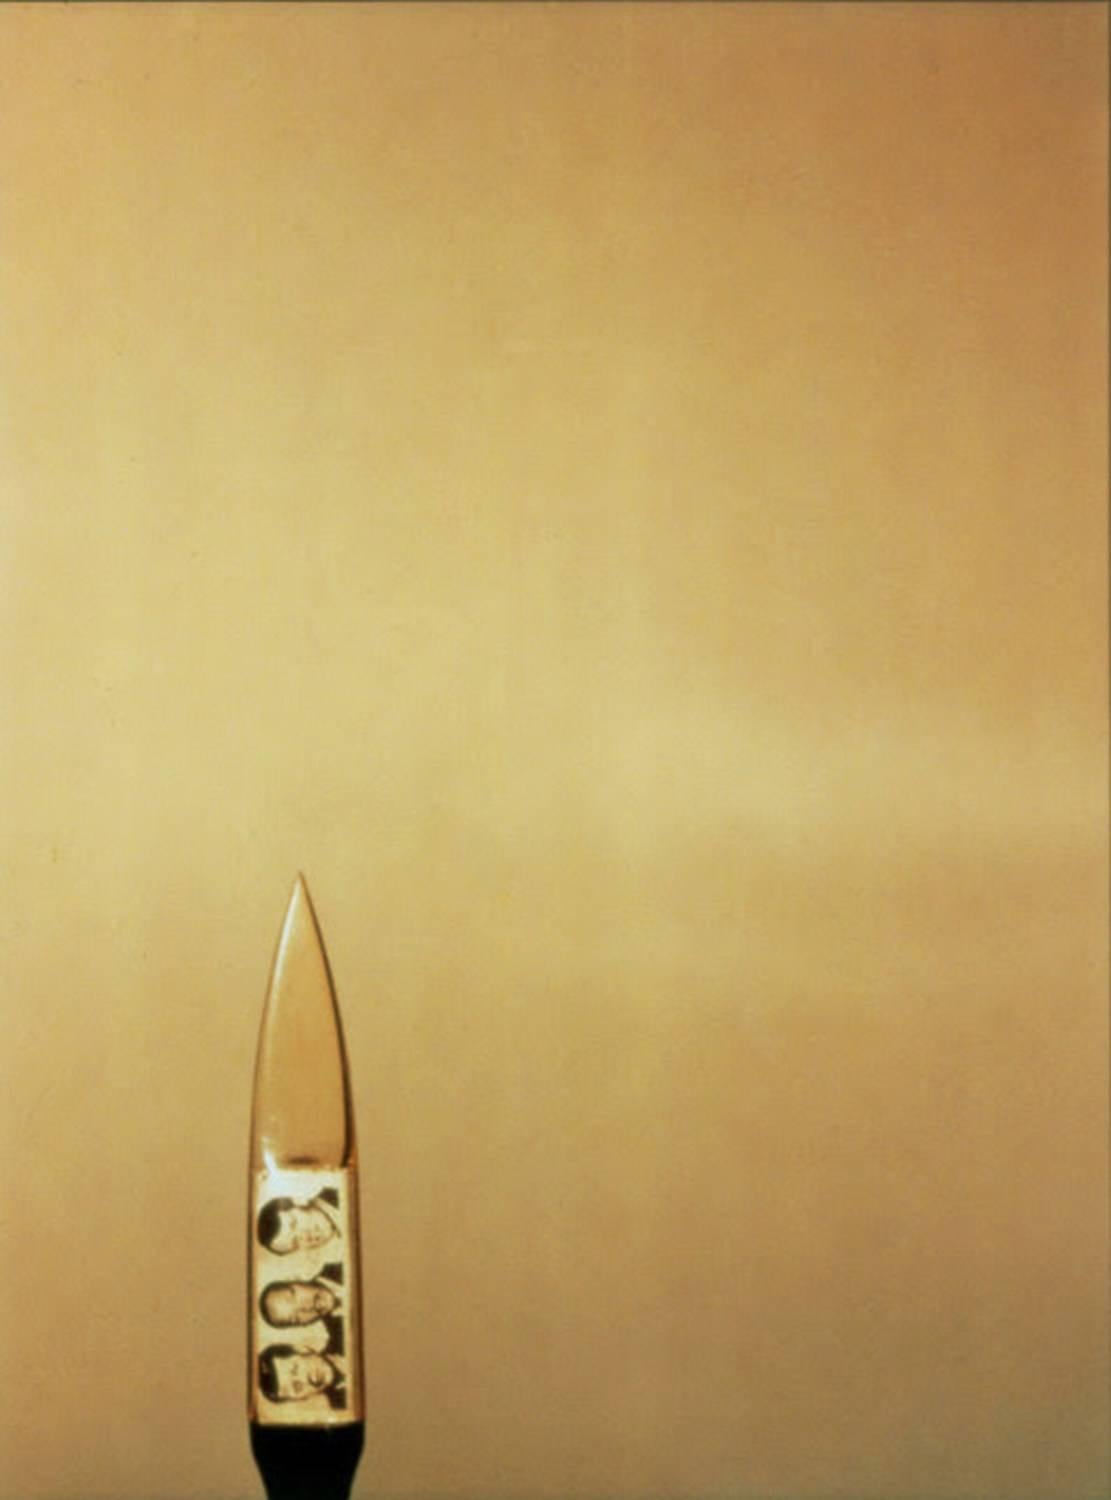 Untitled (Pen) - Photograph by Kerry James Marshall